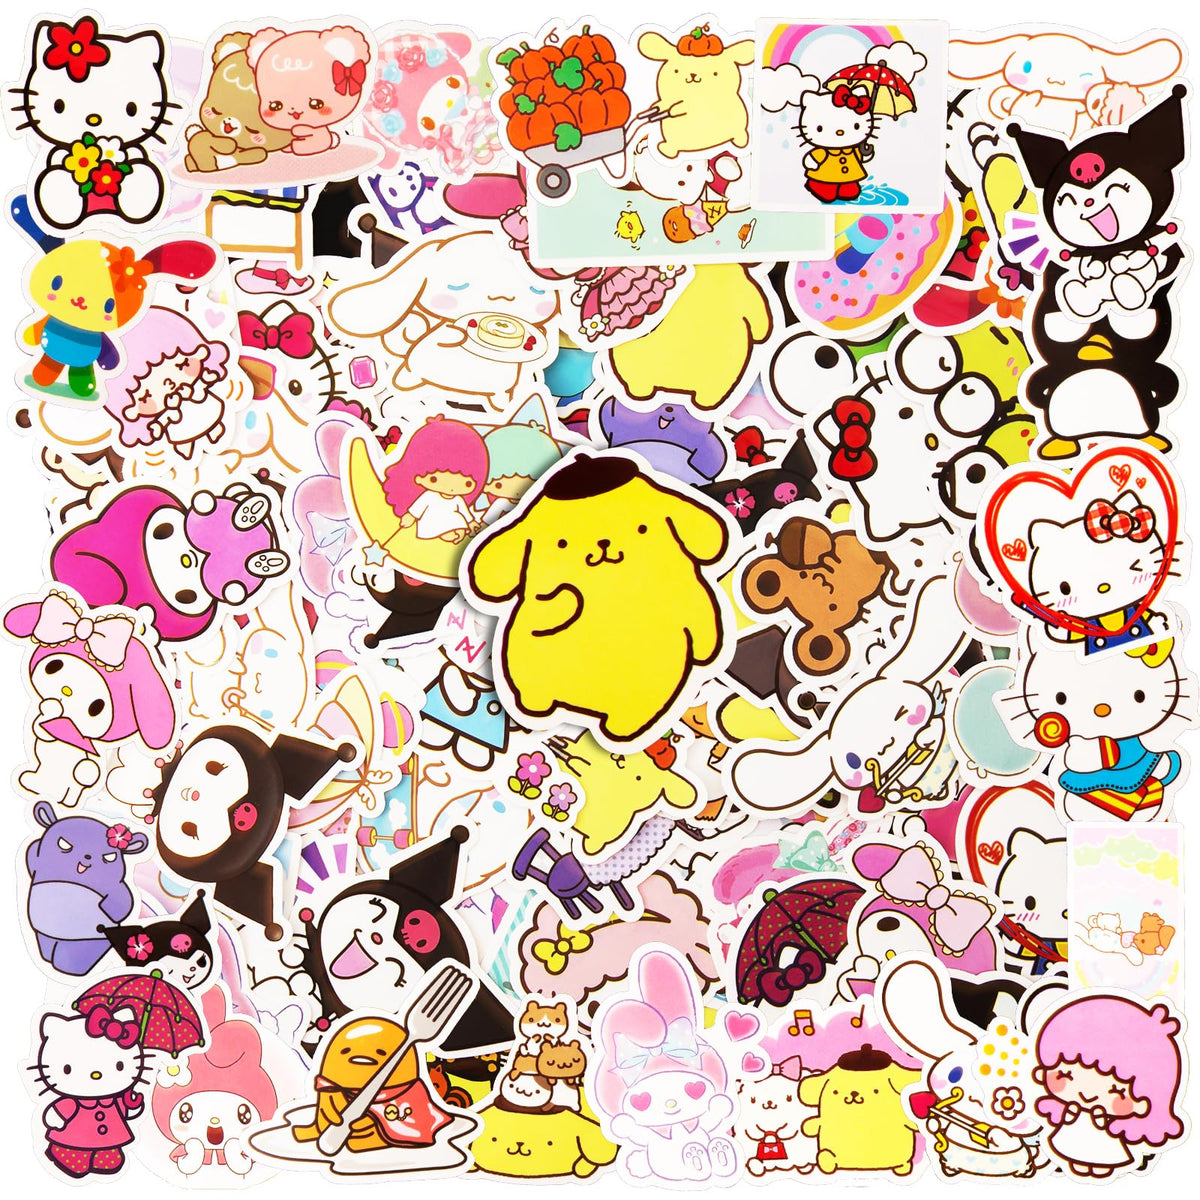 100PCS Vinyl Stickers for Kids, Kawaii Kurromi Stickers Waterproof Stickers, Non-Repeating Guitar Laptop Suitcase Stickers, Best Anime Sticker for Fans, Kids, Teens